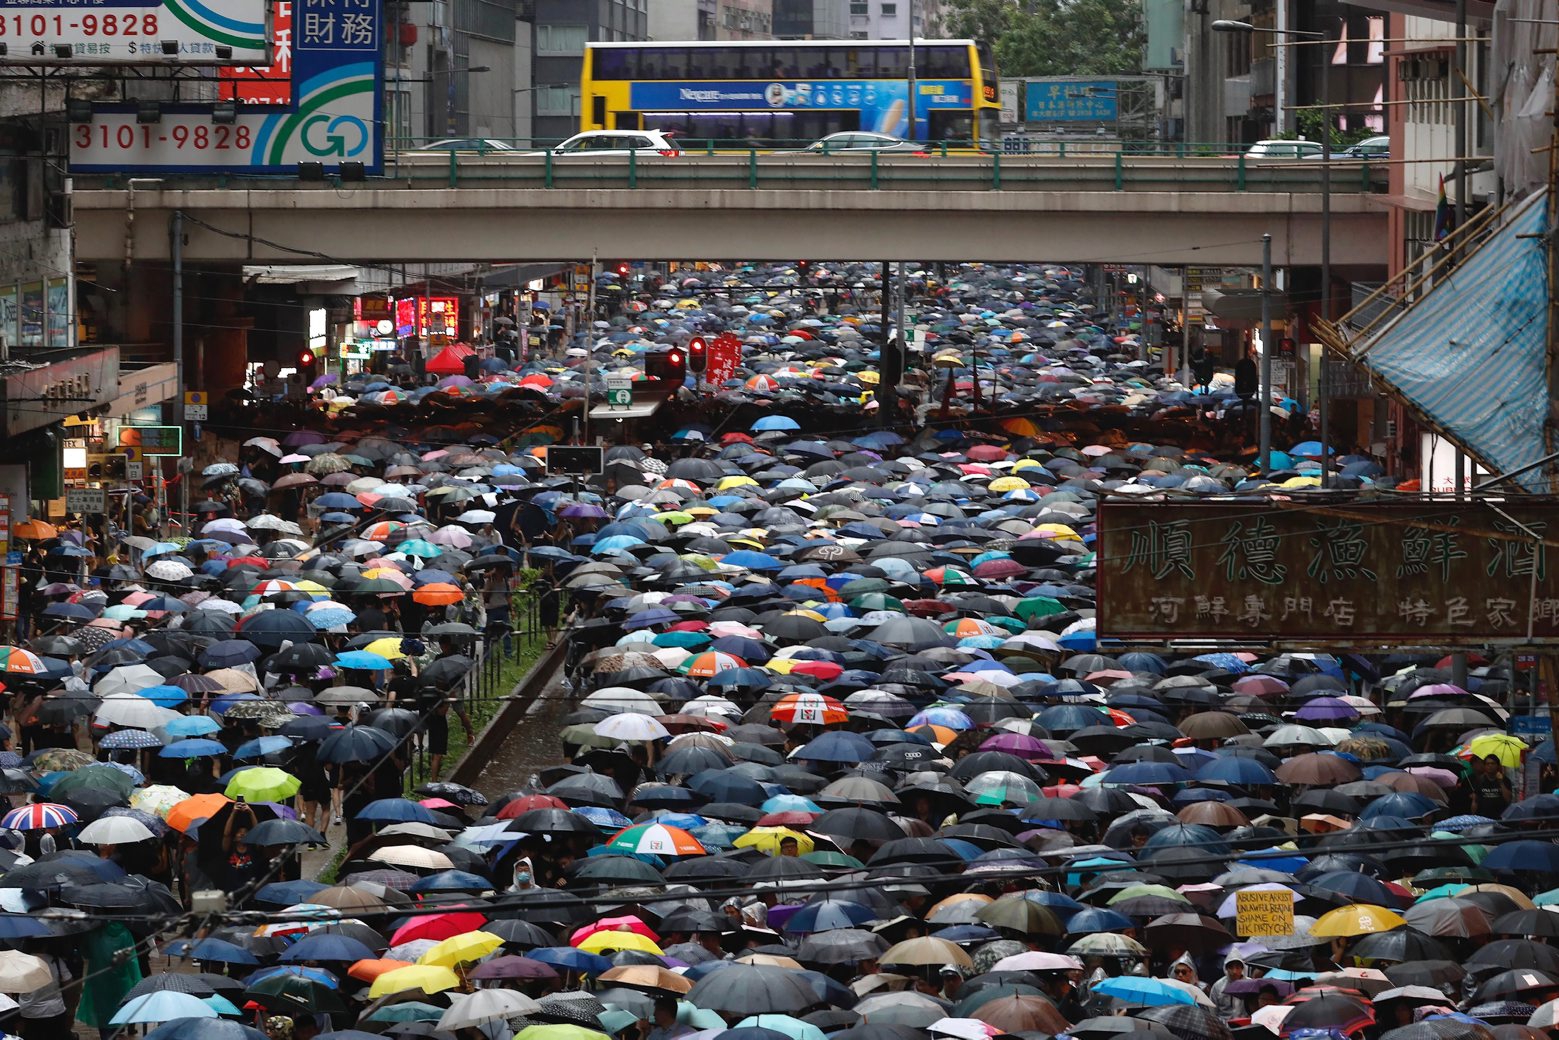 Demonstrators carry umbrellas as they march along a street in Hong Kong, Sunday, Aug. 18, 2019. Heavy rain fell on tens of thousands of umbrella-ready protesters as they started marching from a packed park in central Hong Kong, where mass pro-democracy demonstrations have become a regular weekend activity. (AP Photo/Vincent Yu) Hong Kong Protests